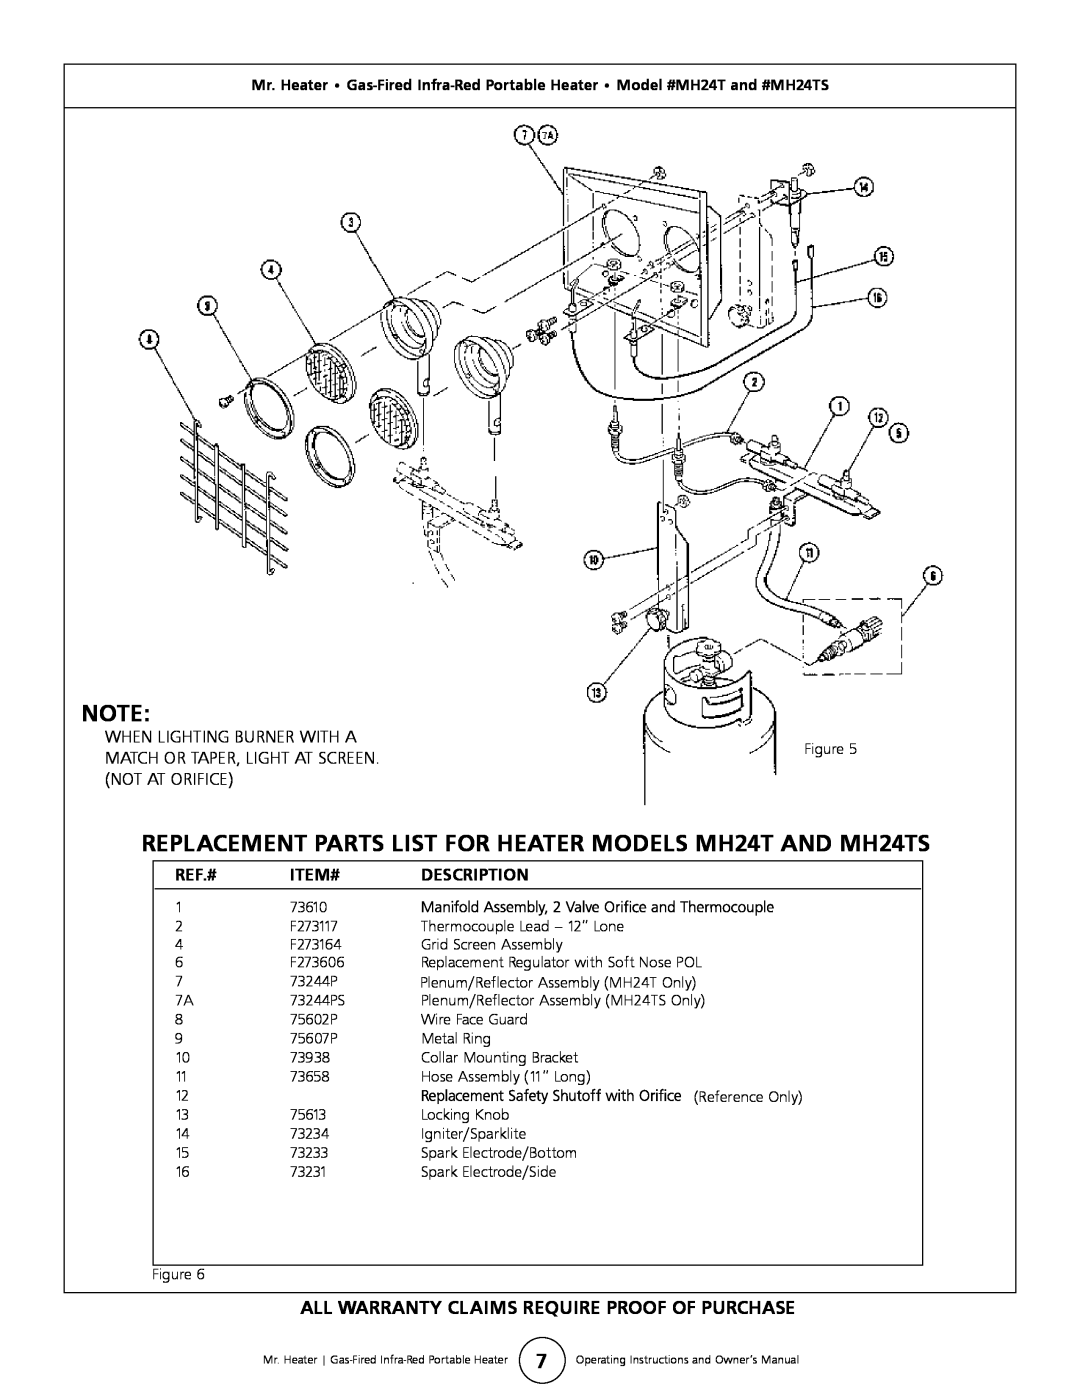 Mr. Heater MH24TS operating instructions All Warranty Claims Require Proof Of Purchase, Ref.# Item# Description 